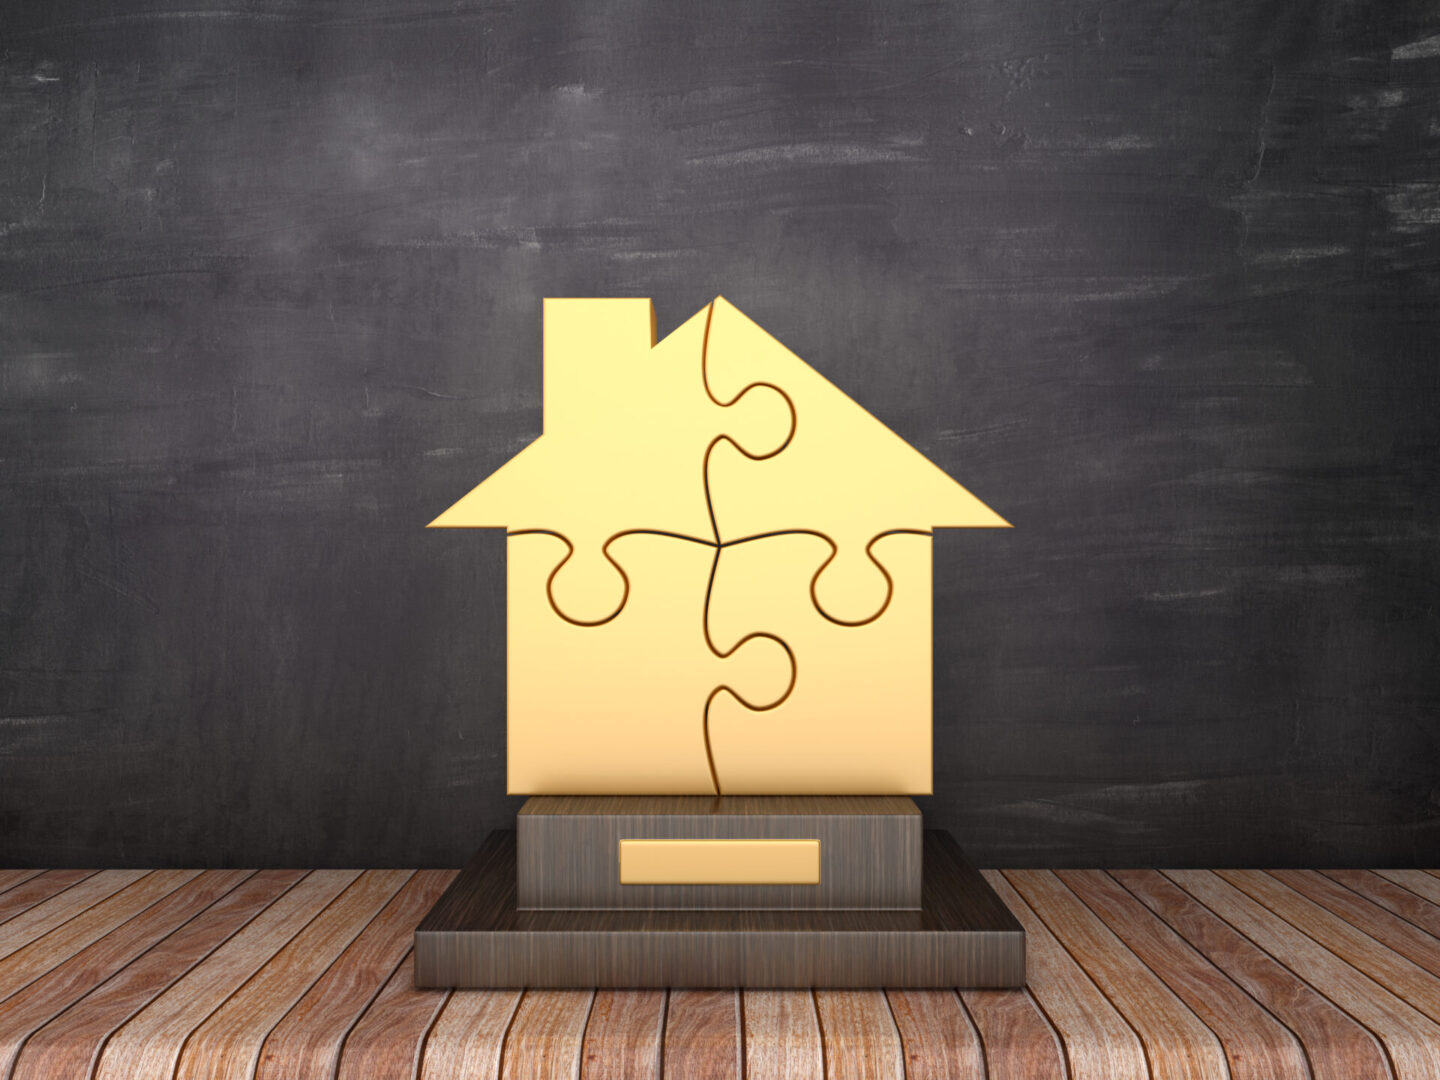 Trophy with Puzzle House on Wood Floor - Chalkboard Background - 3D Rendering